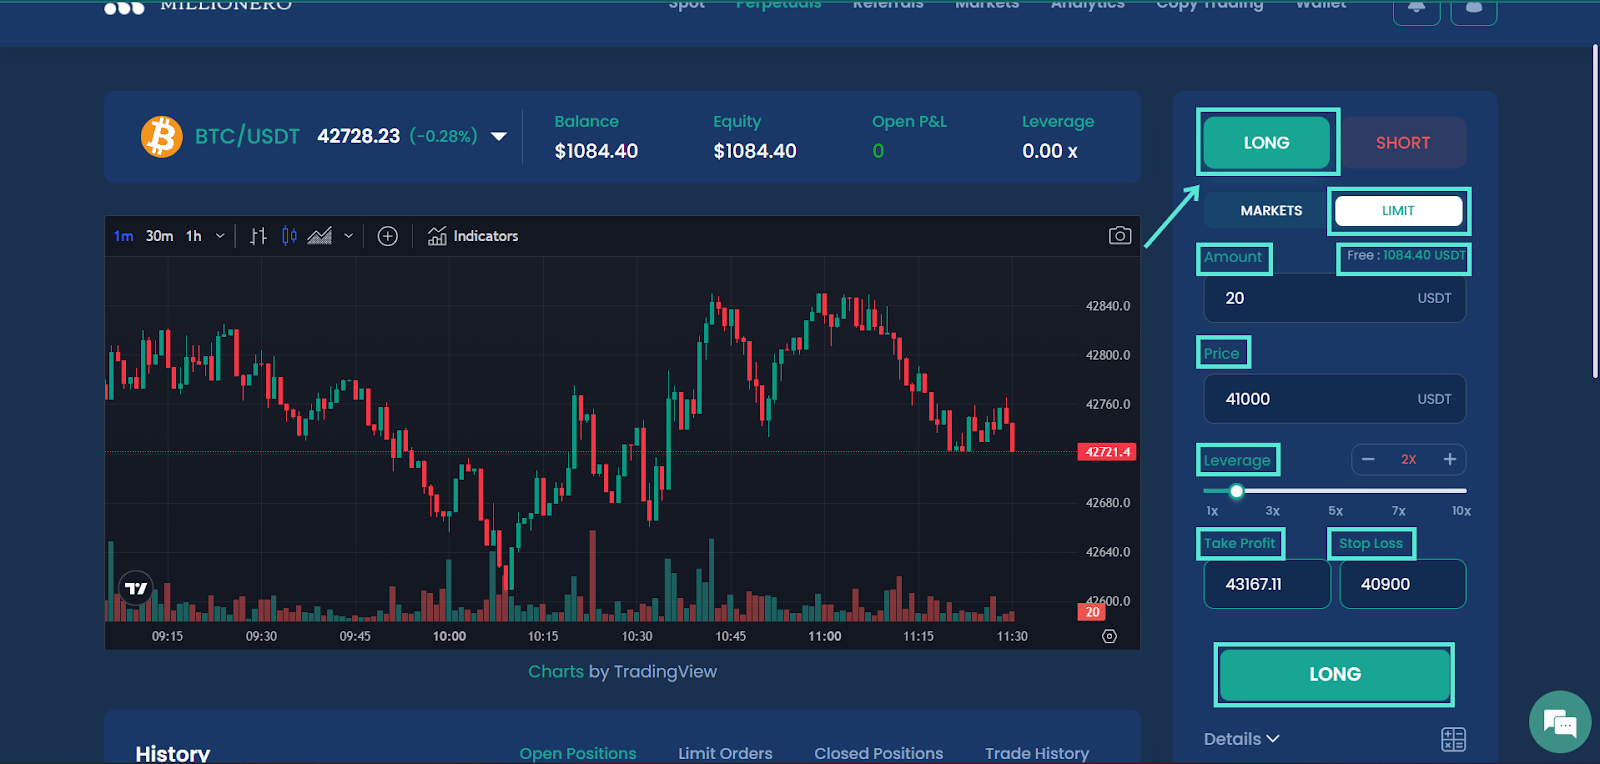 Long-limit orders to trade crypto on Millionero